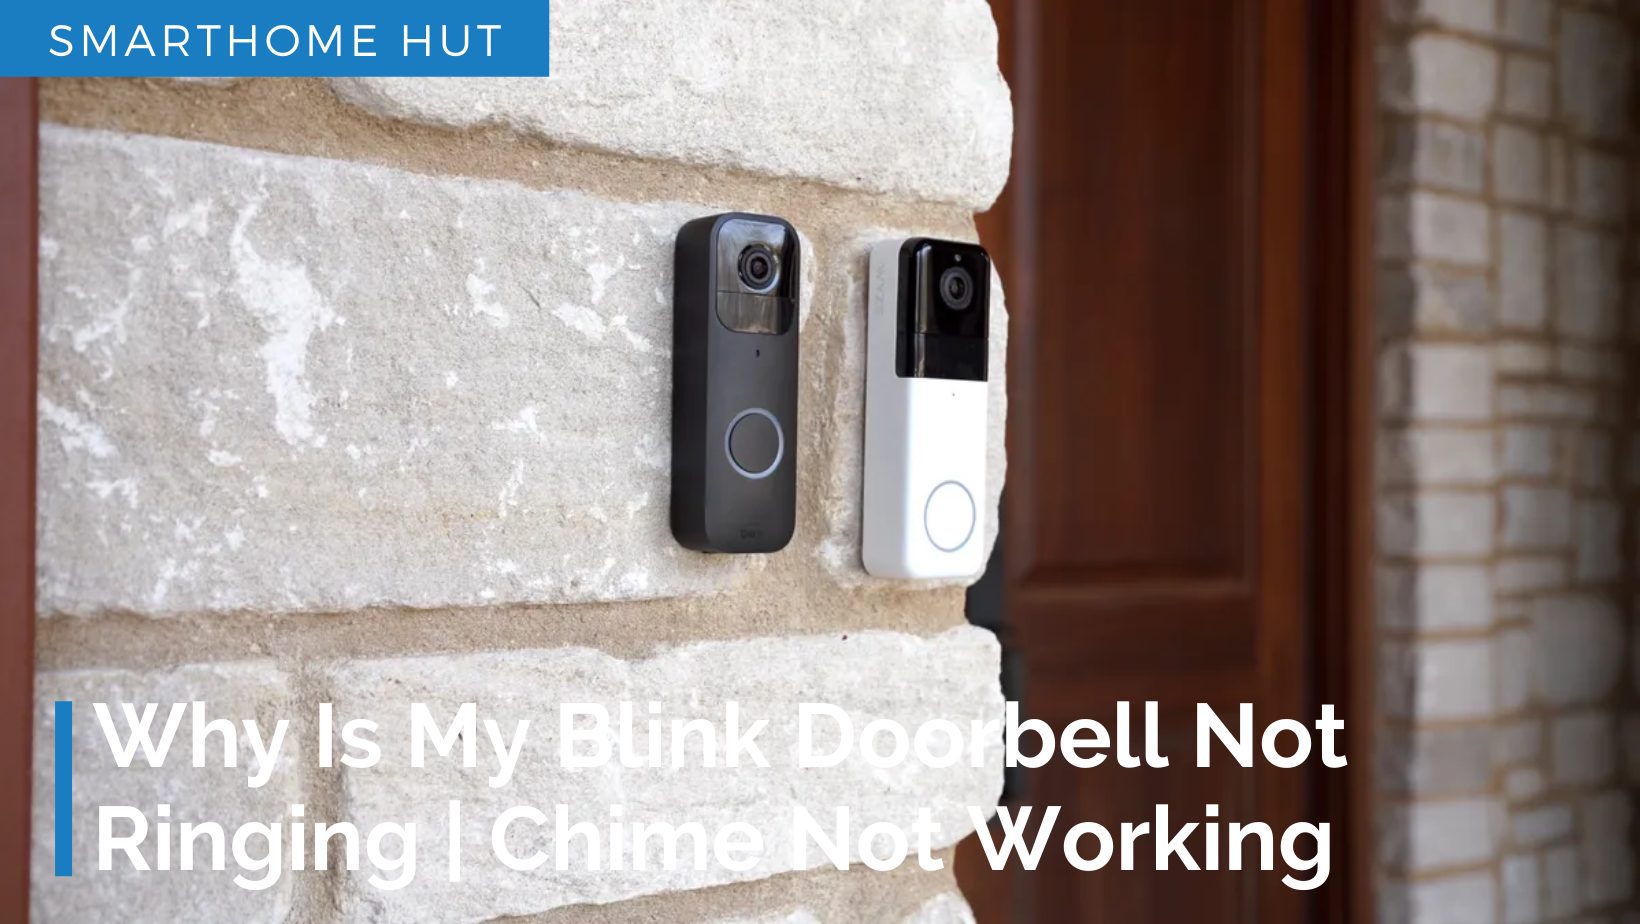 Why Is My Blink Doorbell Not Ringing